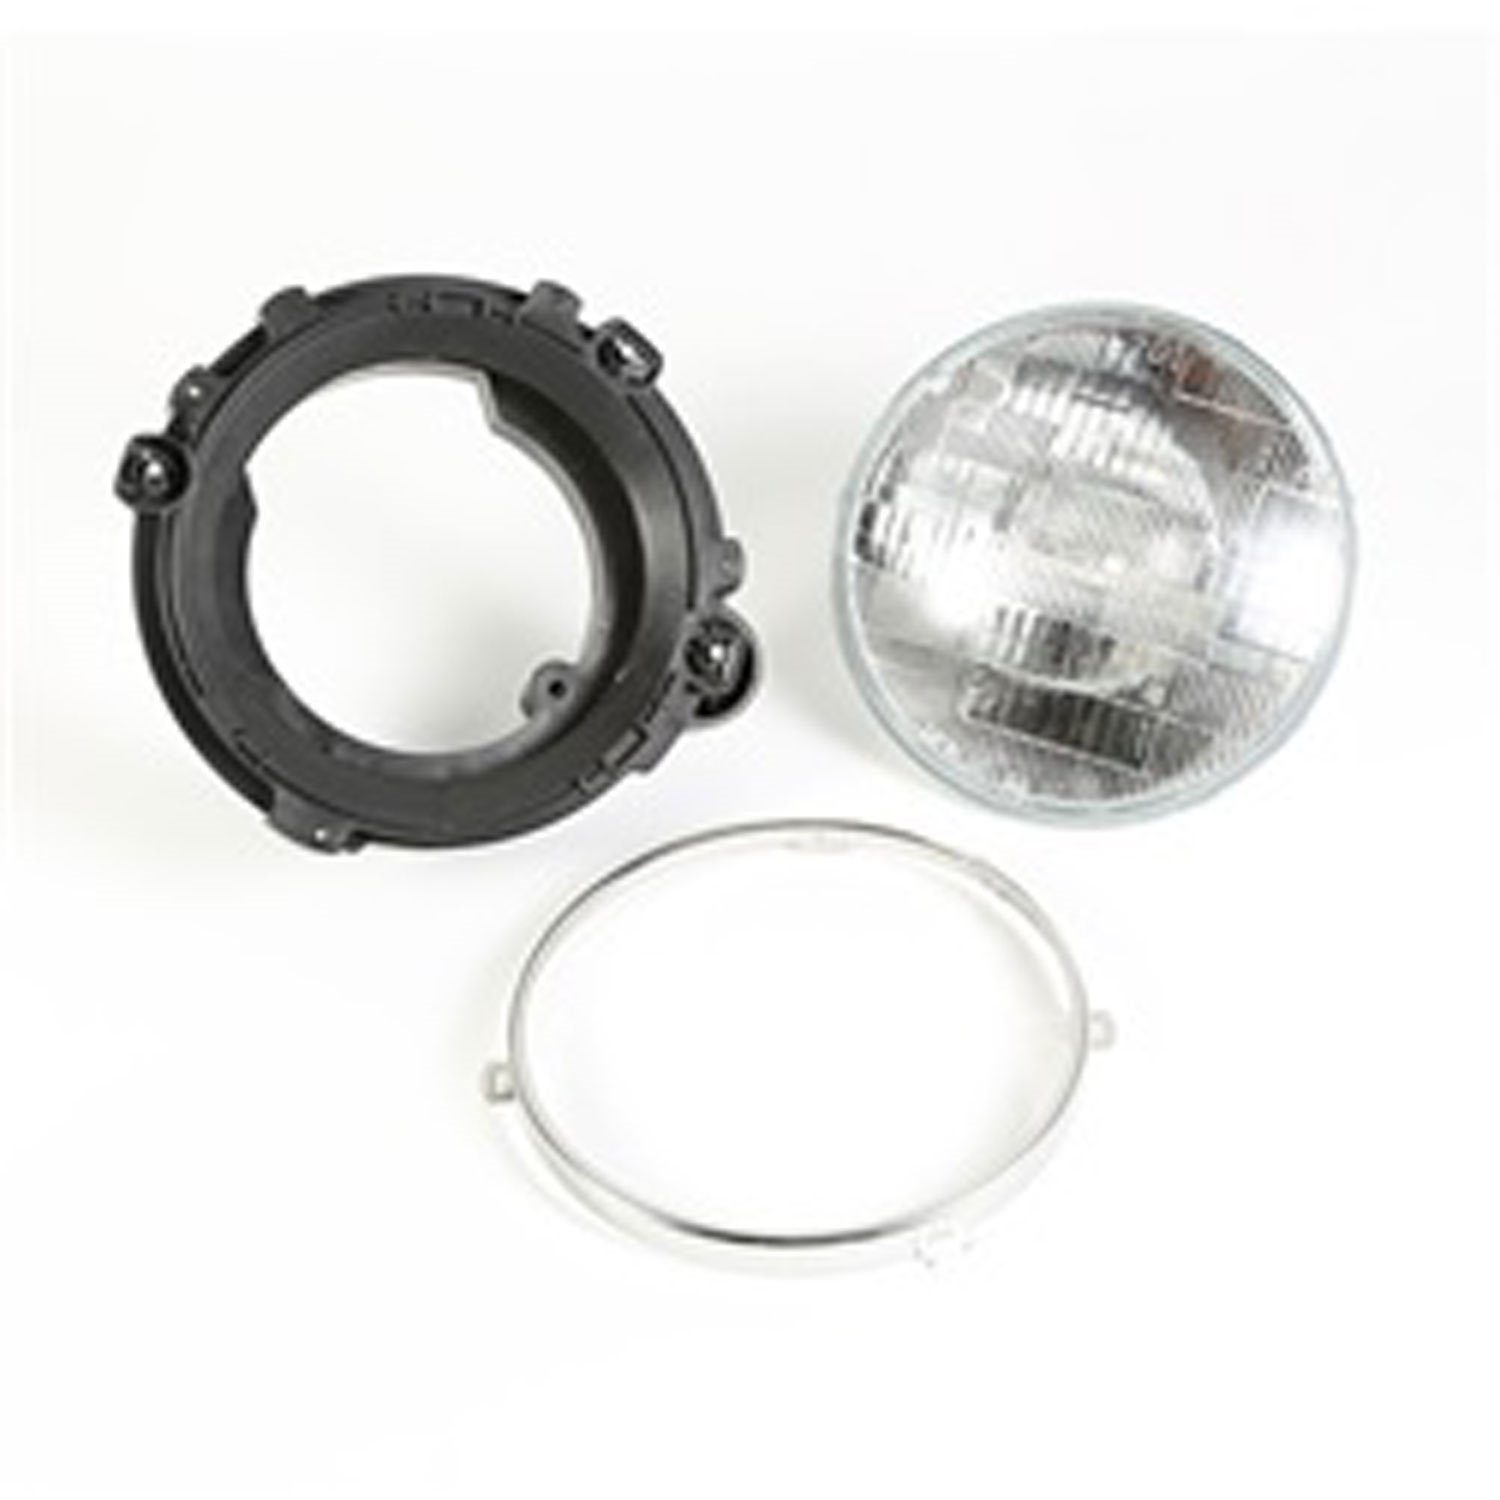 Replacement headlight assembly from Omix-ADA, Fits right side on 97-06 Jeep Wrangler